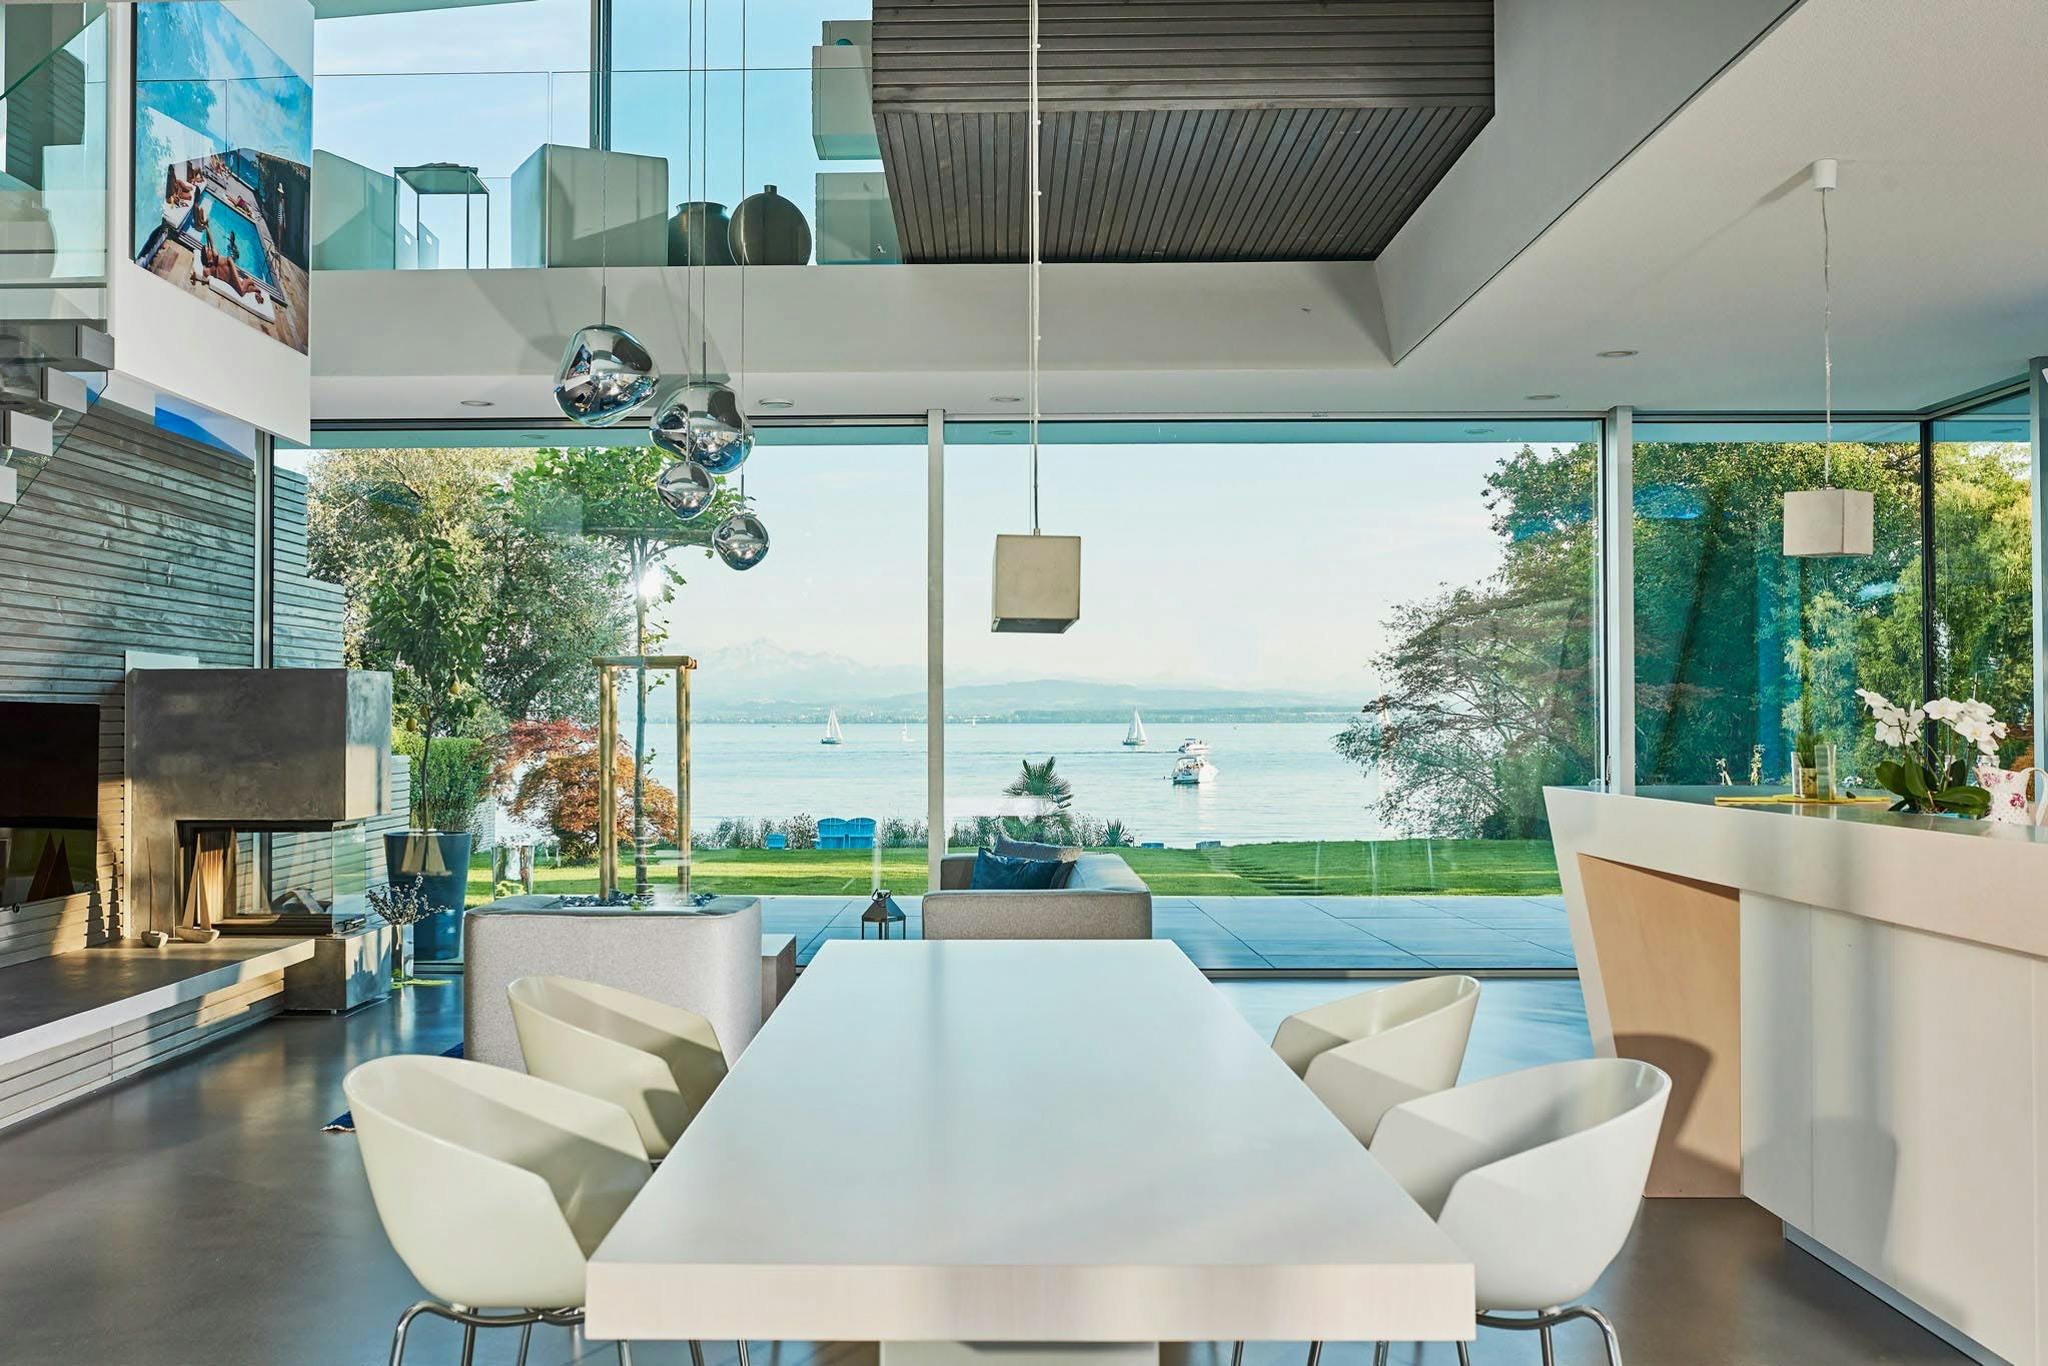 large panel residential glass walls with ocean view